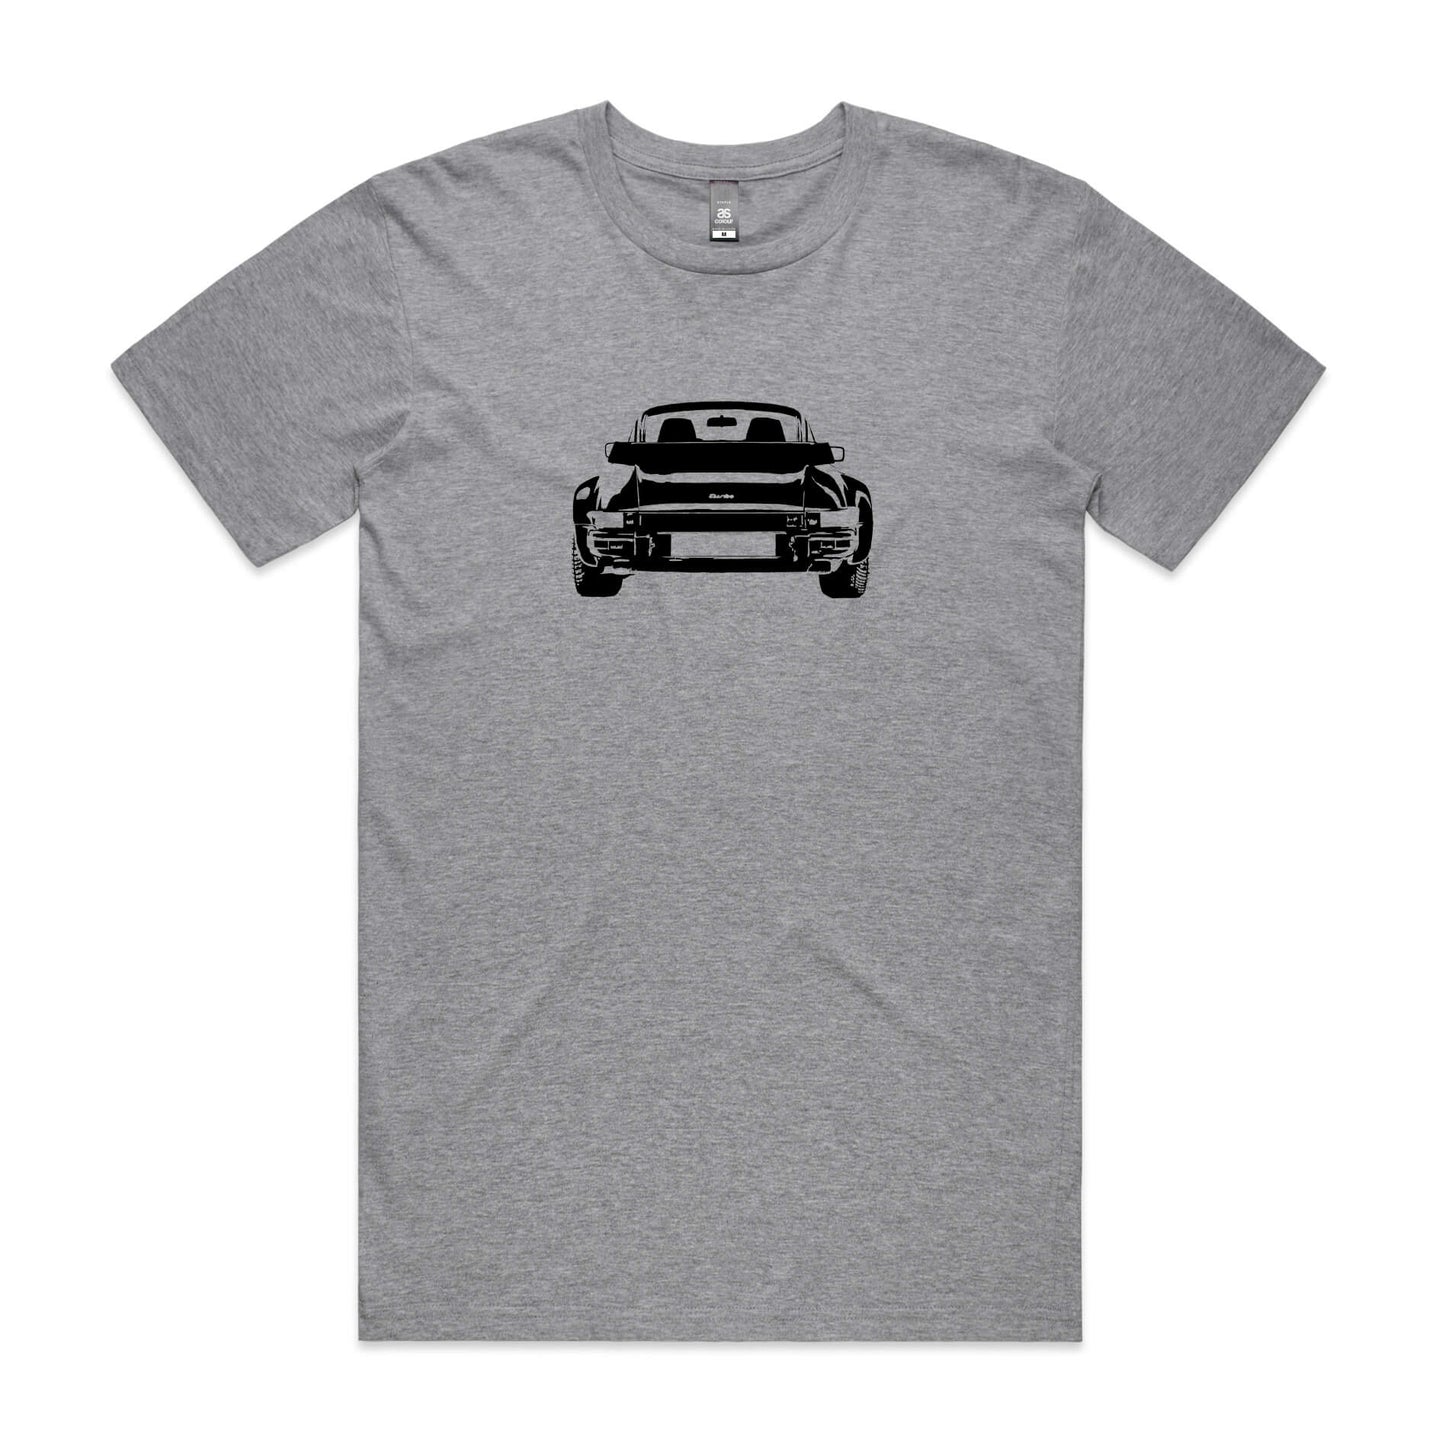 Porsche 911 turbo t-shirt in grey with a black car graphic